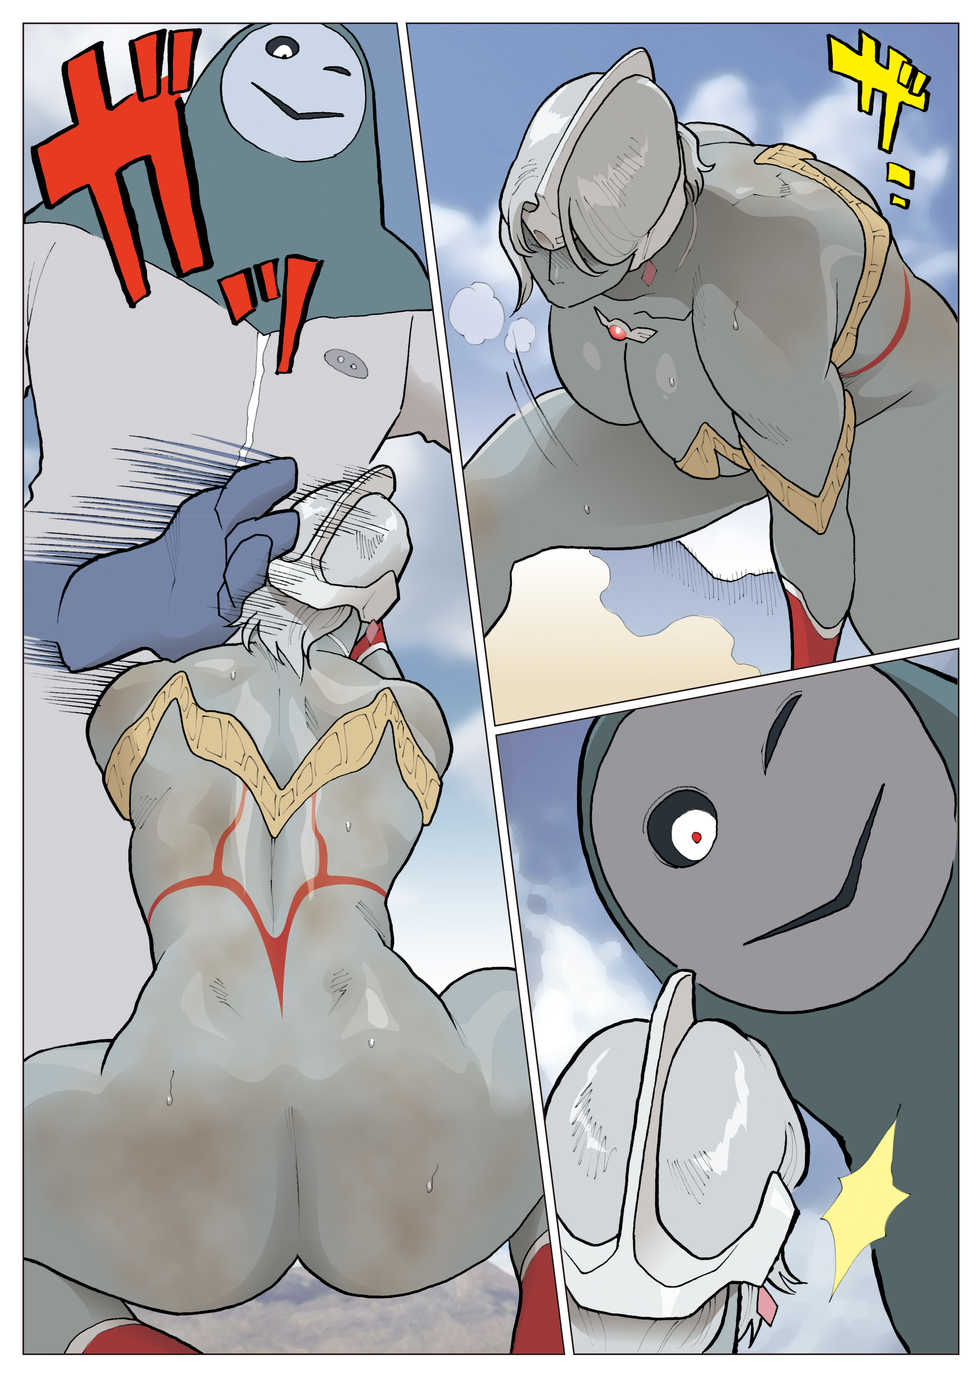 [Urban Doujin Magazine] SILVER GIANTESS 3.75 [Chinese] [不咕鸟汉化组] - Page 22